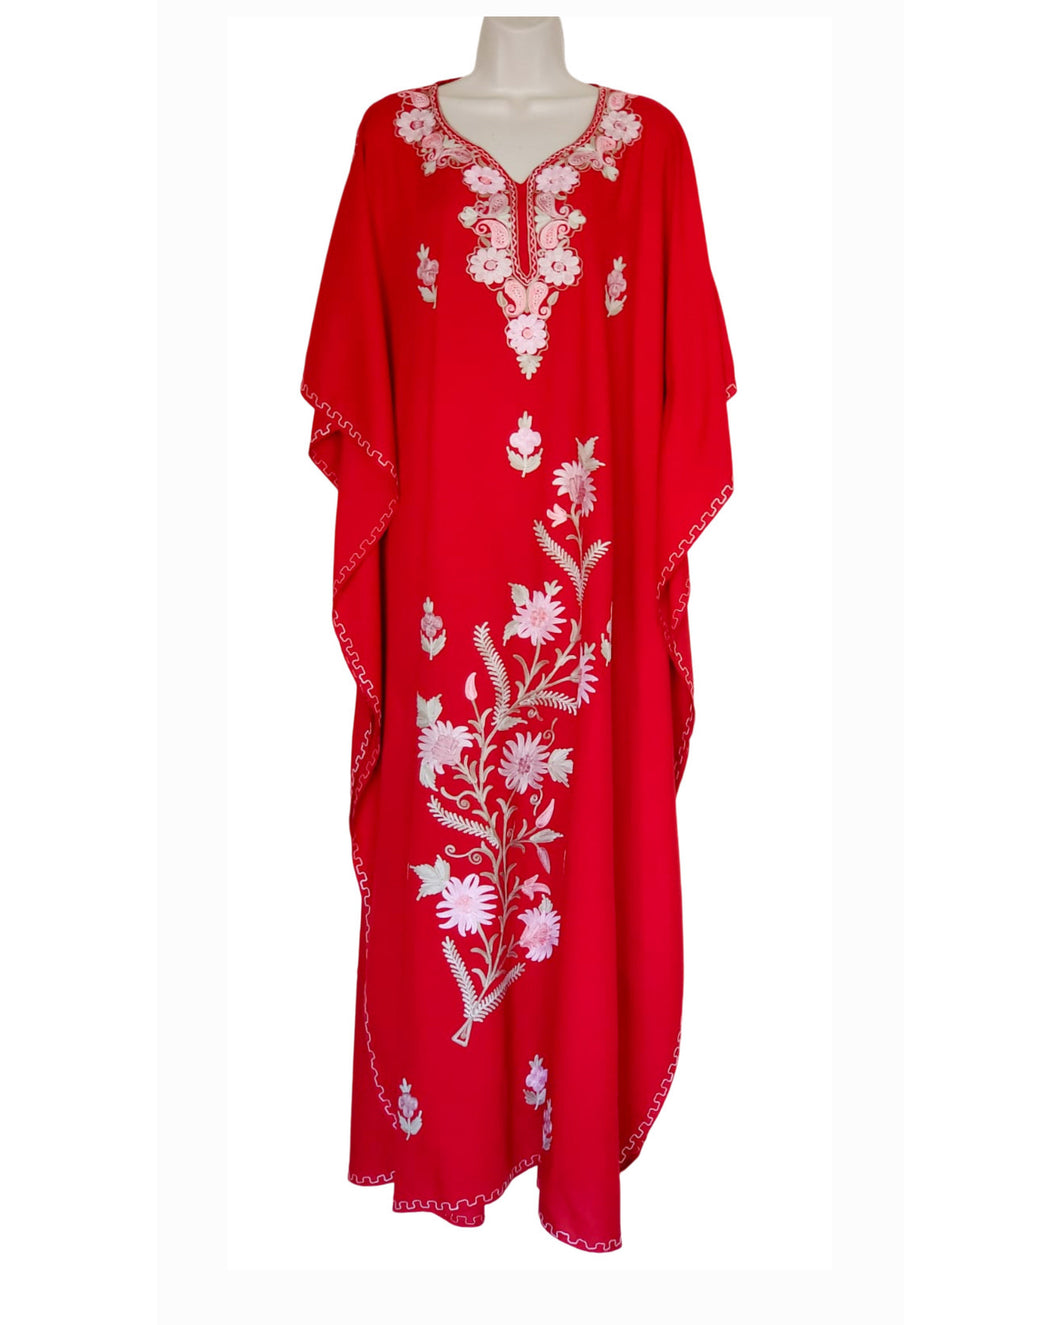 Kaftan Dress (Red with Multi Hand Embroidered Flowers)